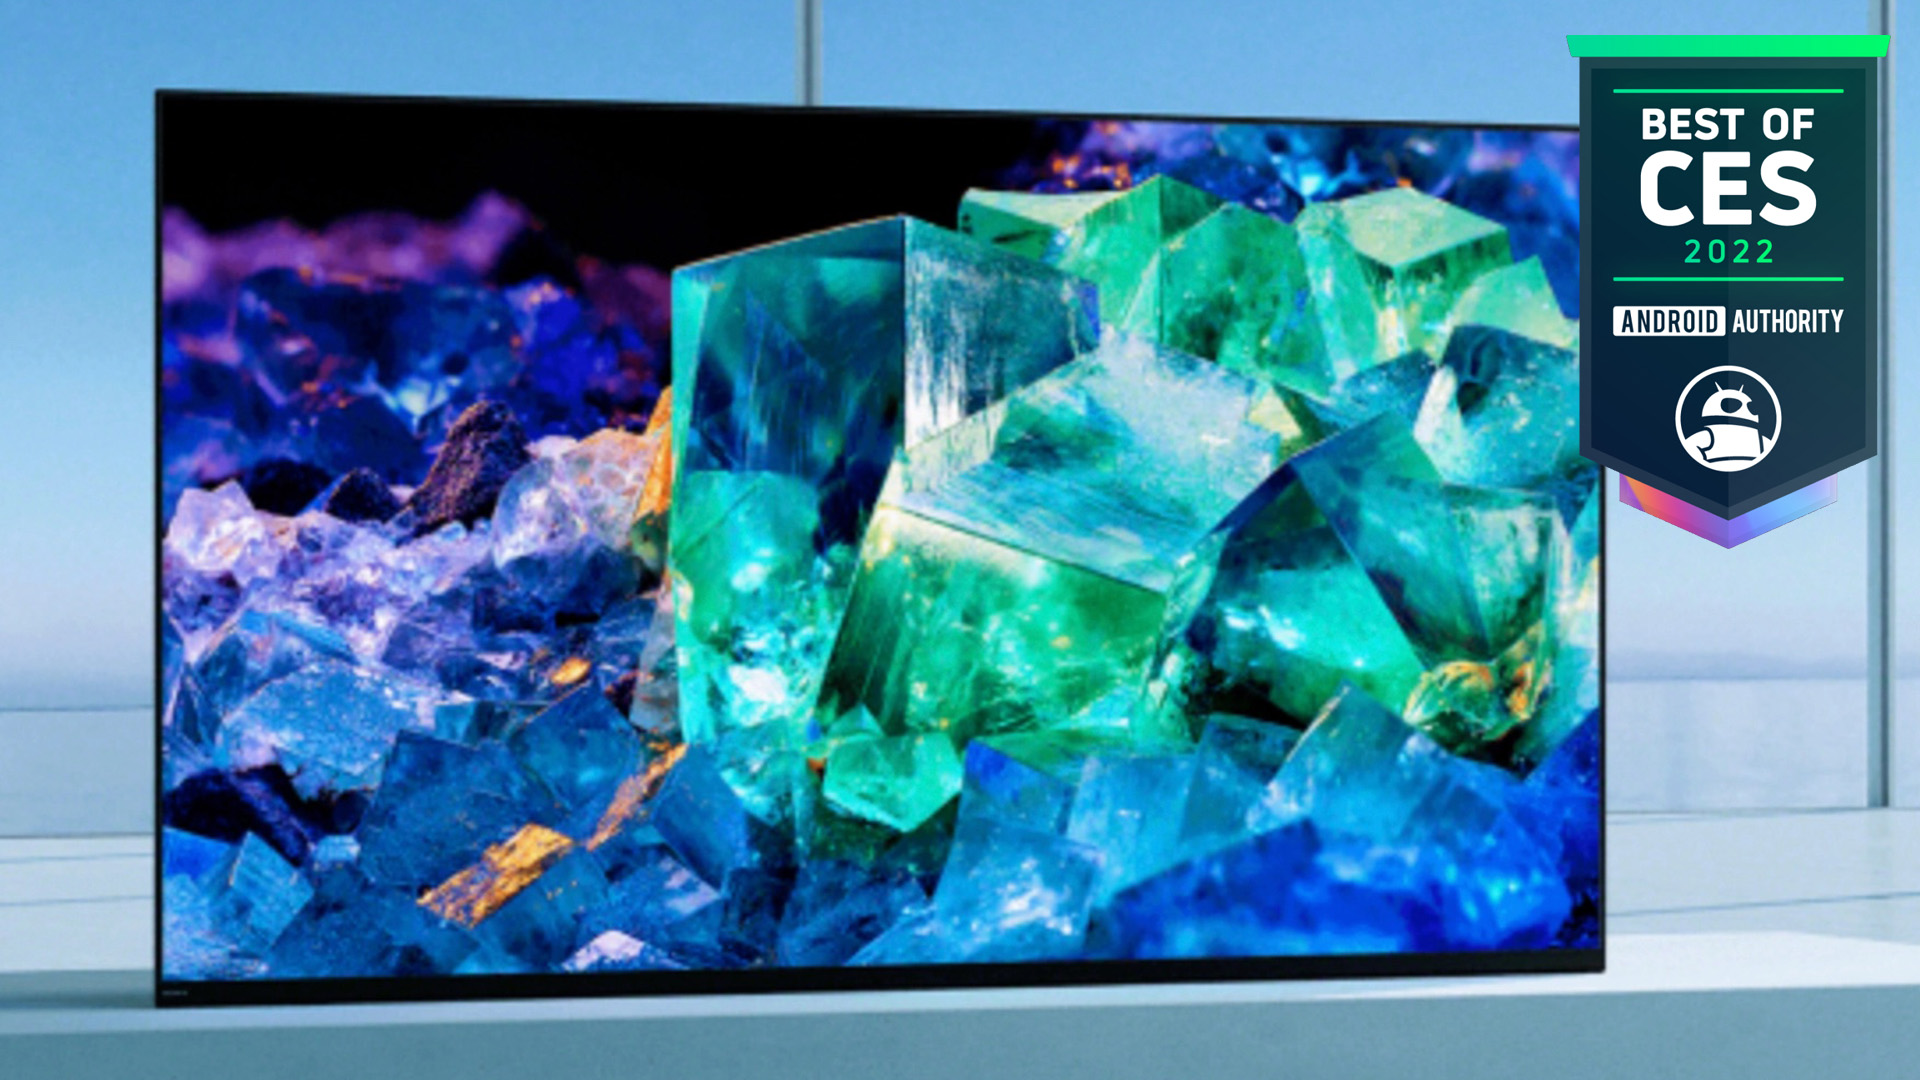 Sony A95K QD OLED TV Android Authority Best of CES 2022 Award winner